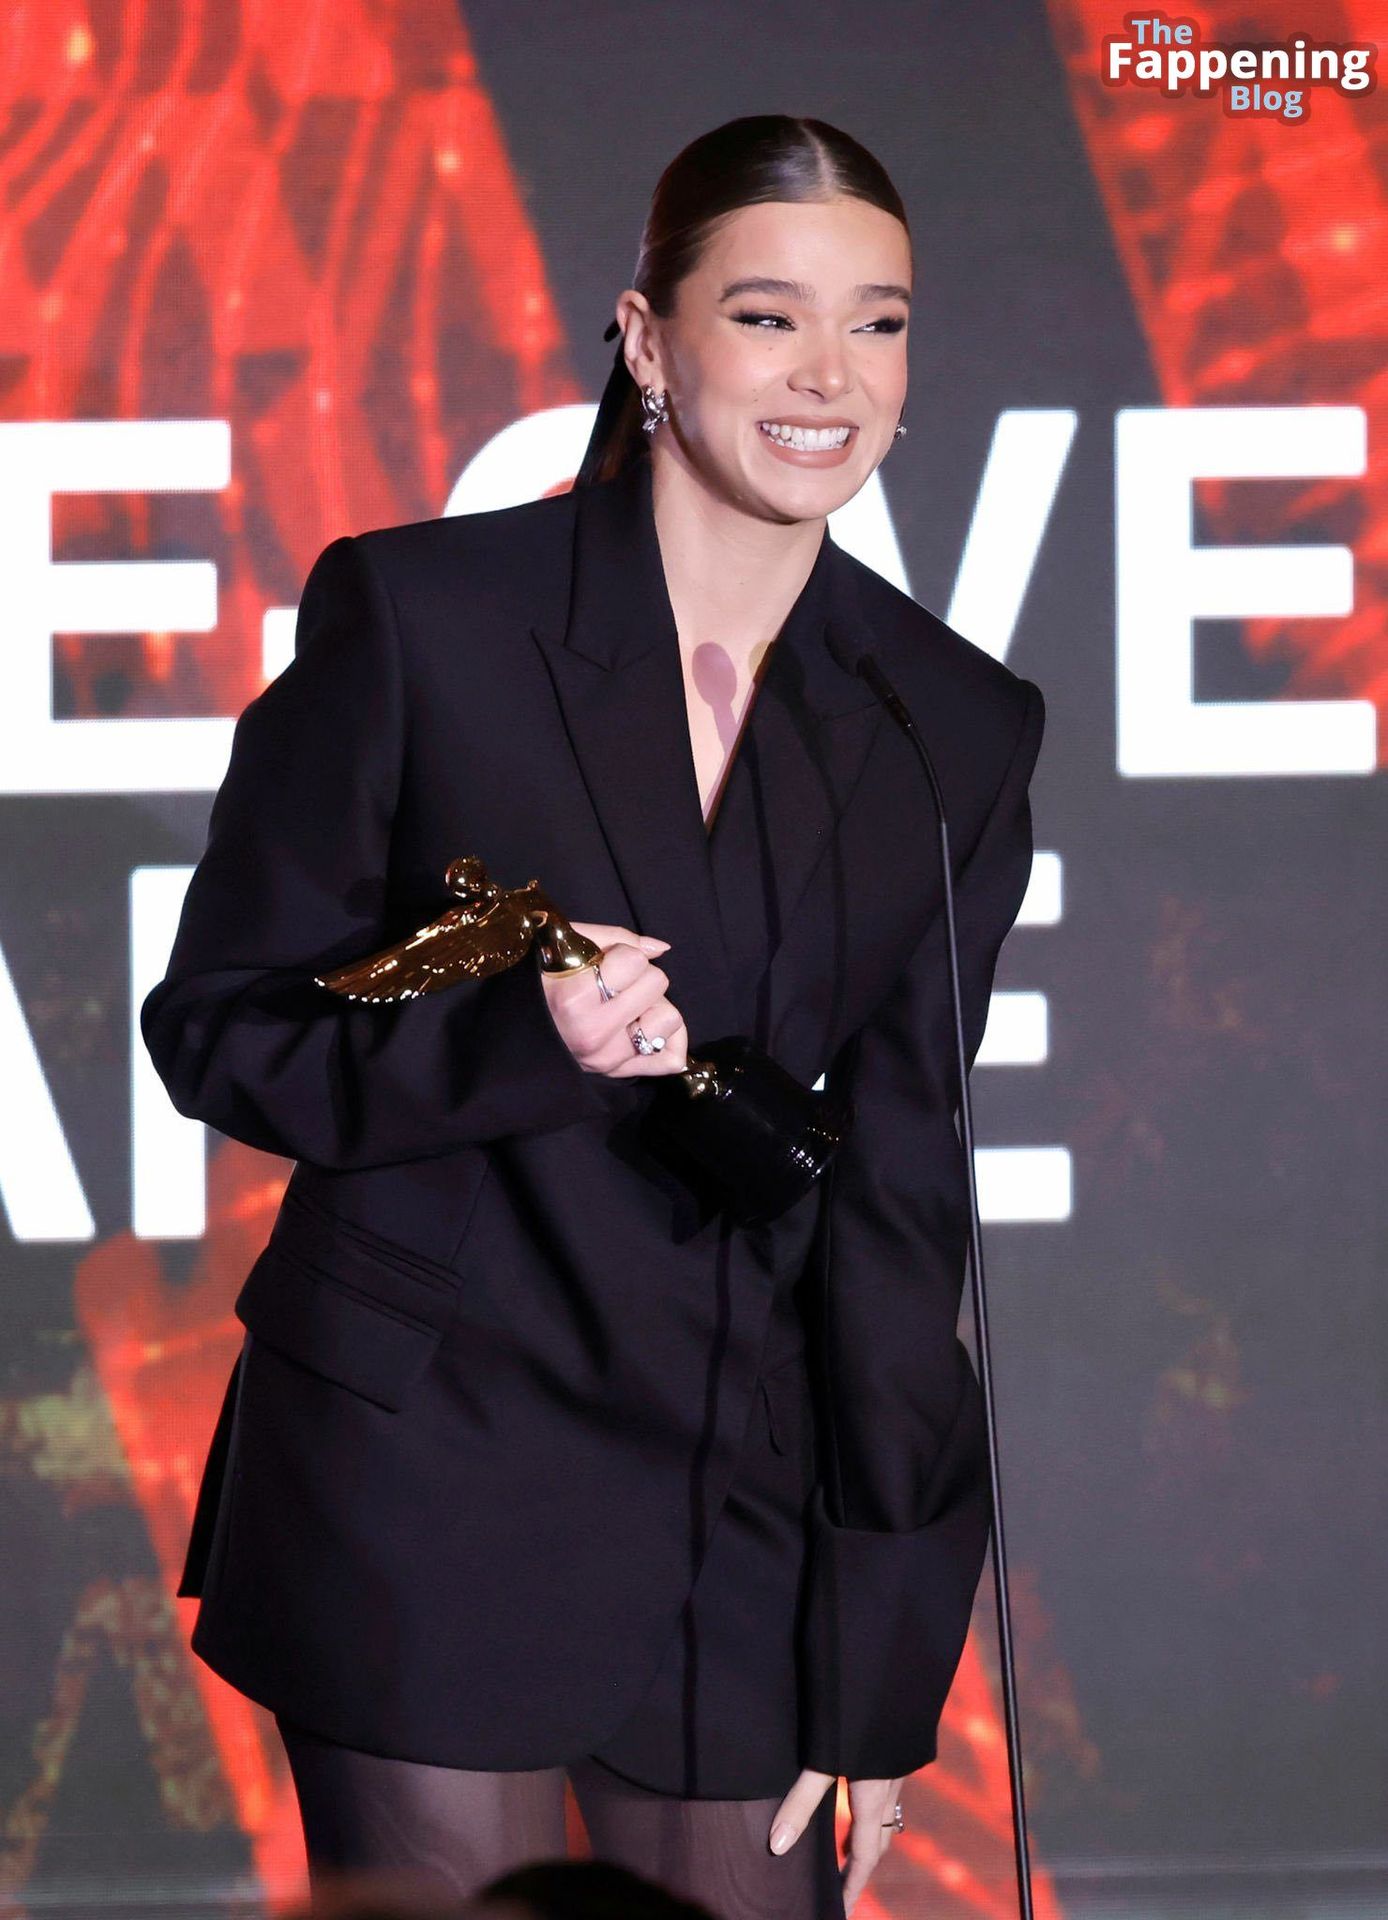 Hailee-Steinfeld-Black-Outfit-Astra-Film-Awards-6-thefappeningblog.com_.jpg